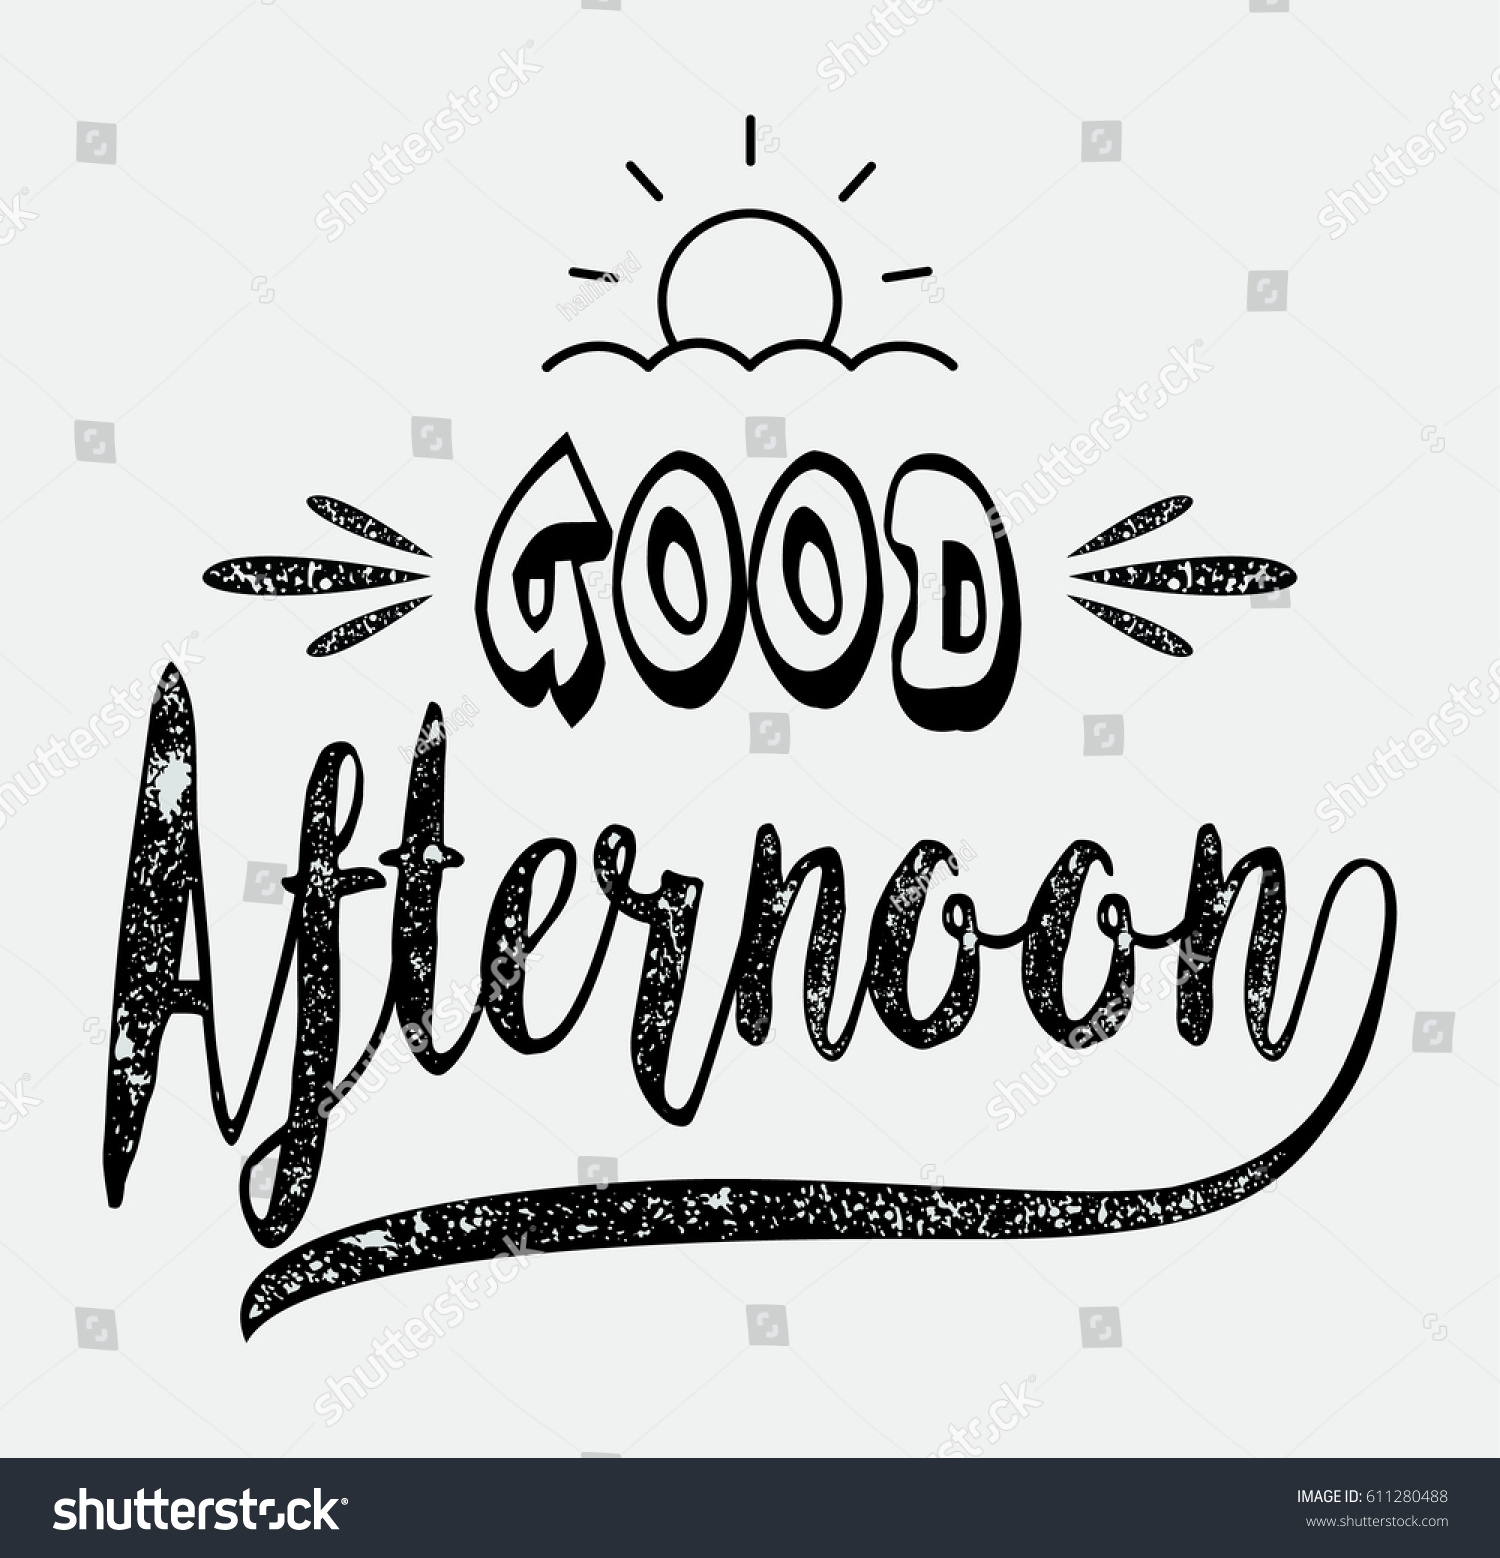 Good Afternoon Card Hand Drawn Lettering Stock Vector (Royalty Free ...